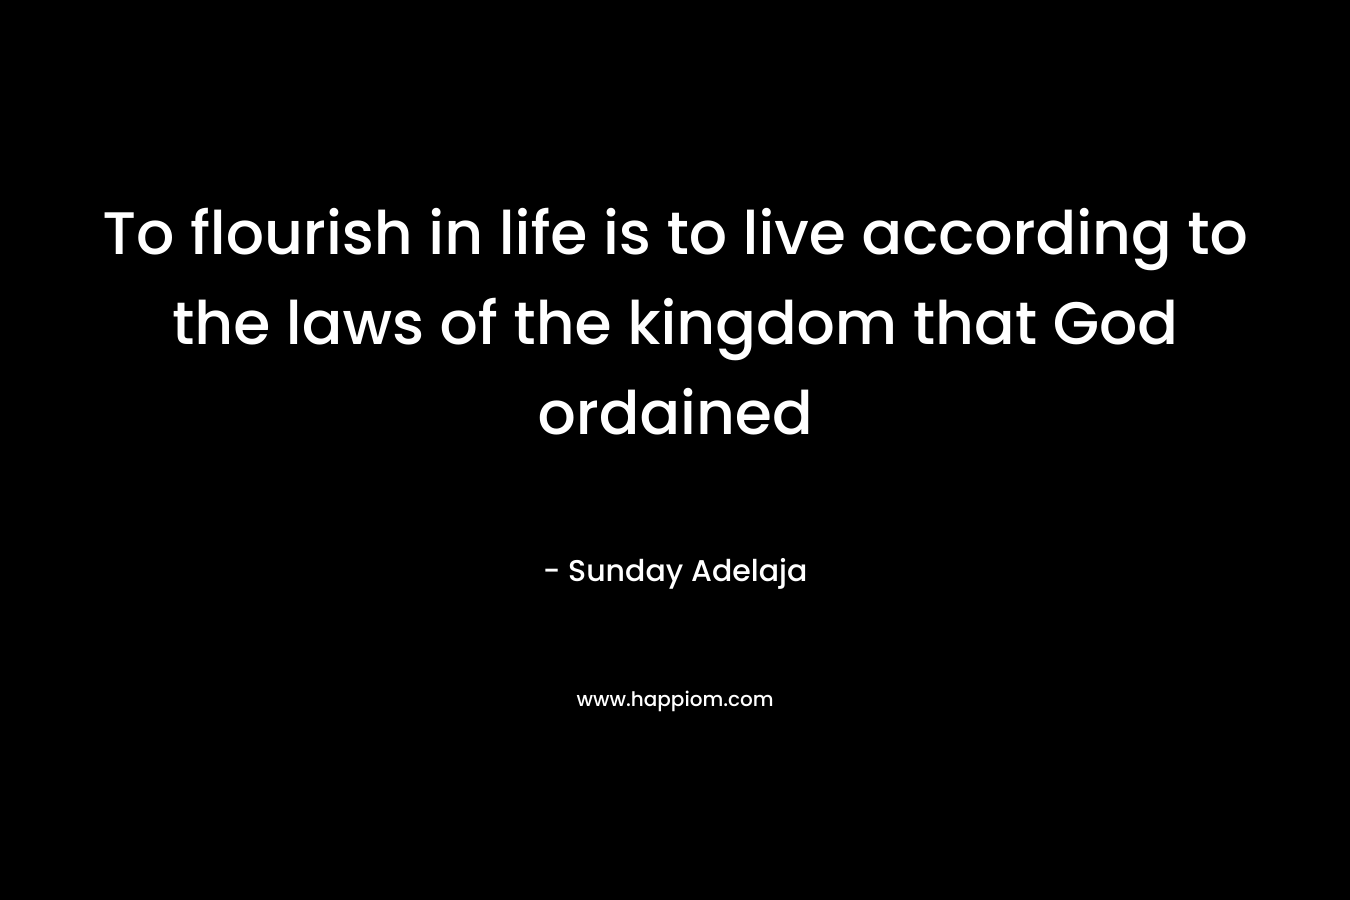 To flourish in life is to live according to the laws of the kingdom that God ordained